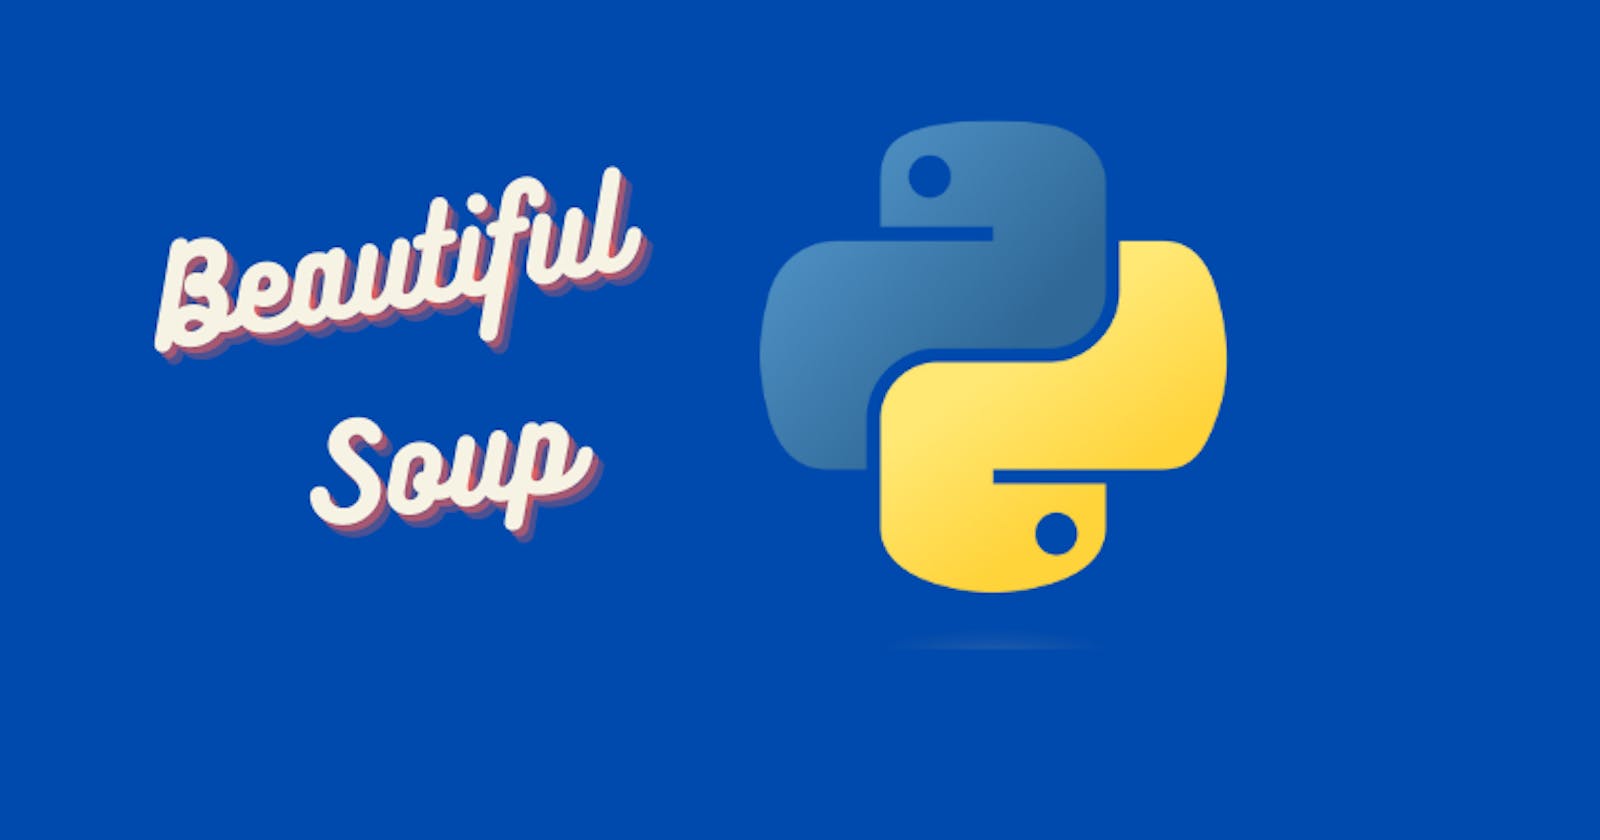 Web Scraping: How to Extract Job Data using Python Beautiful Soup